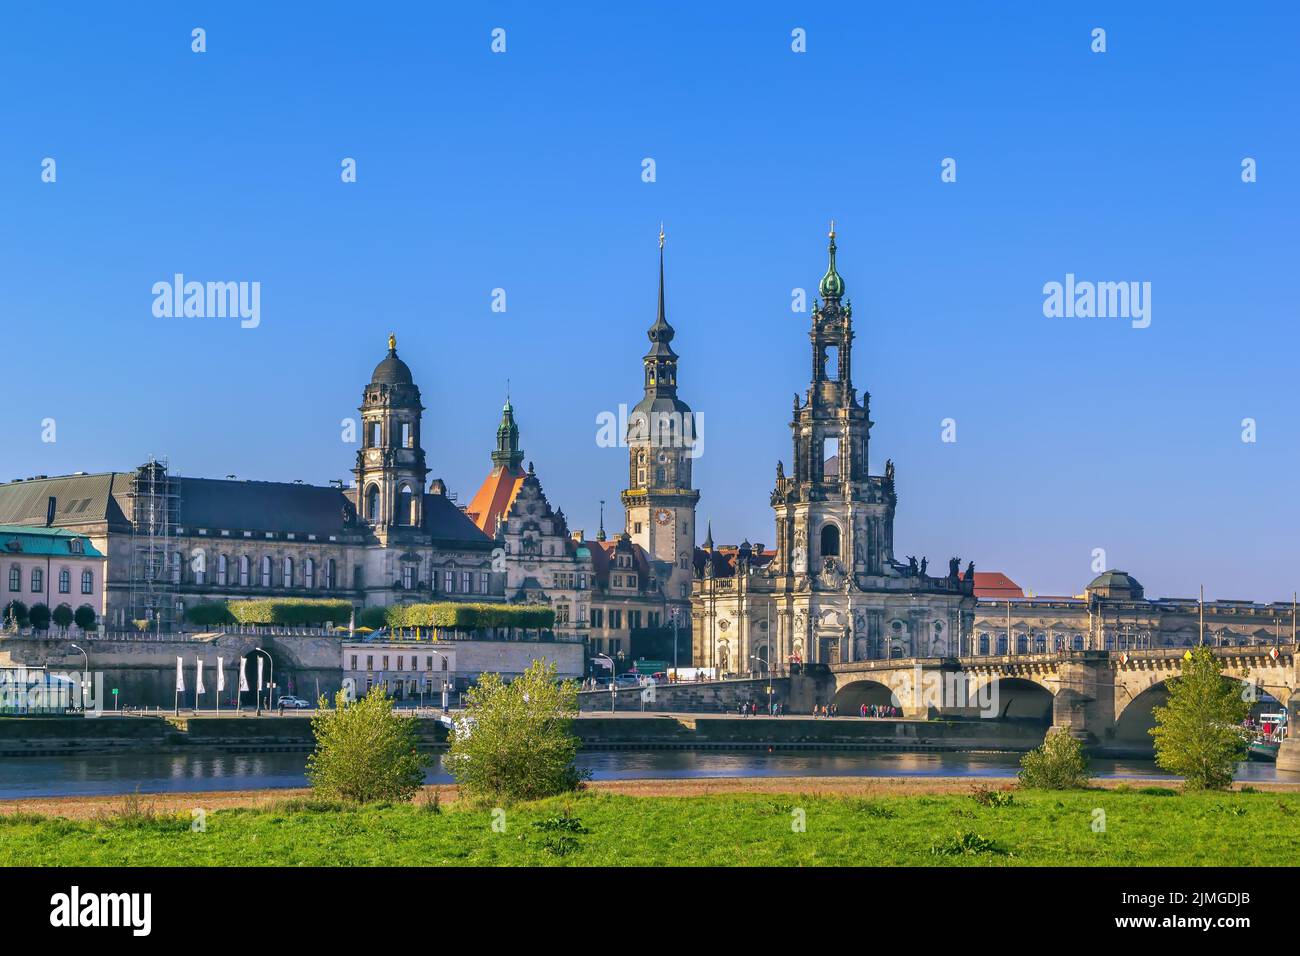 Old town of Dresden, Saxony, Germany Stock Photo